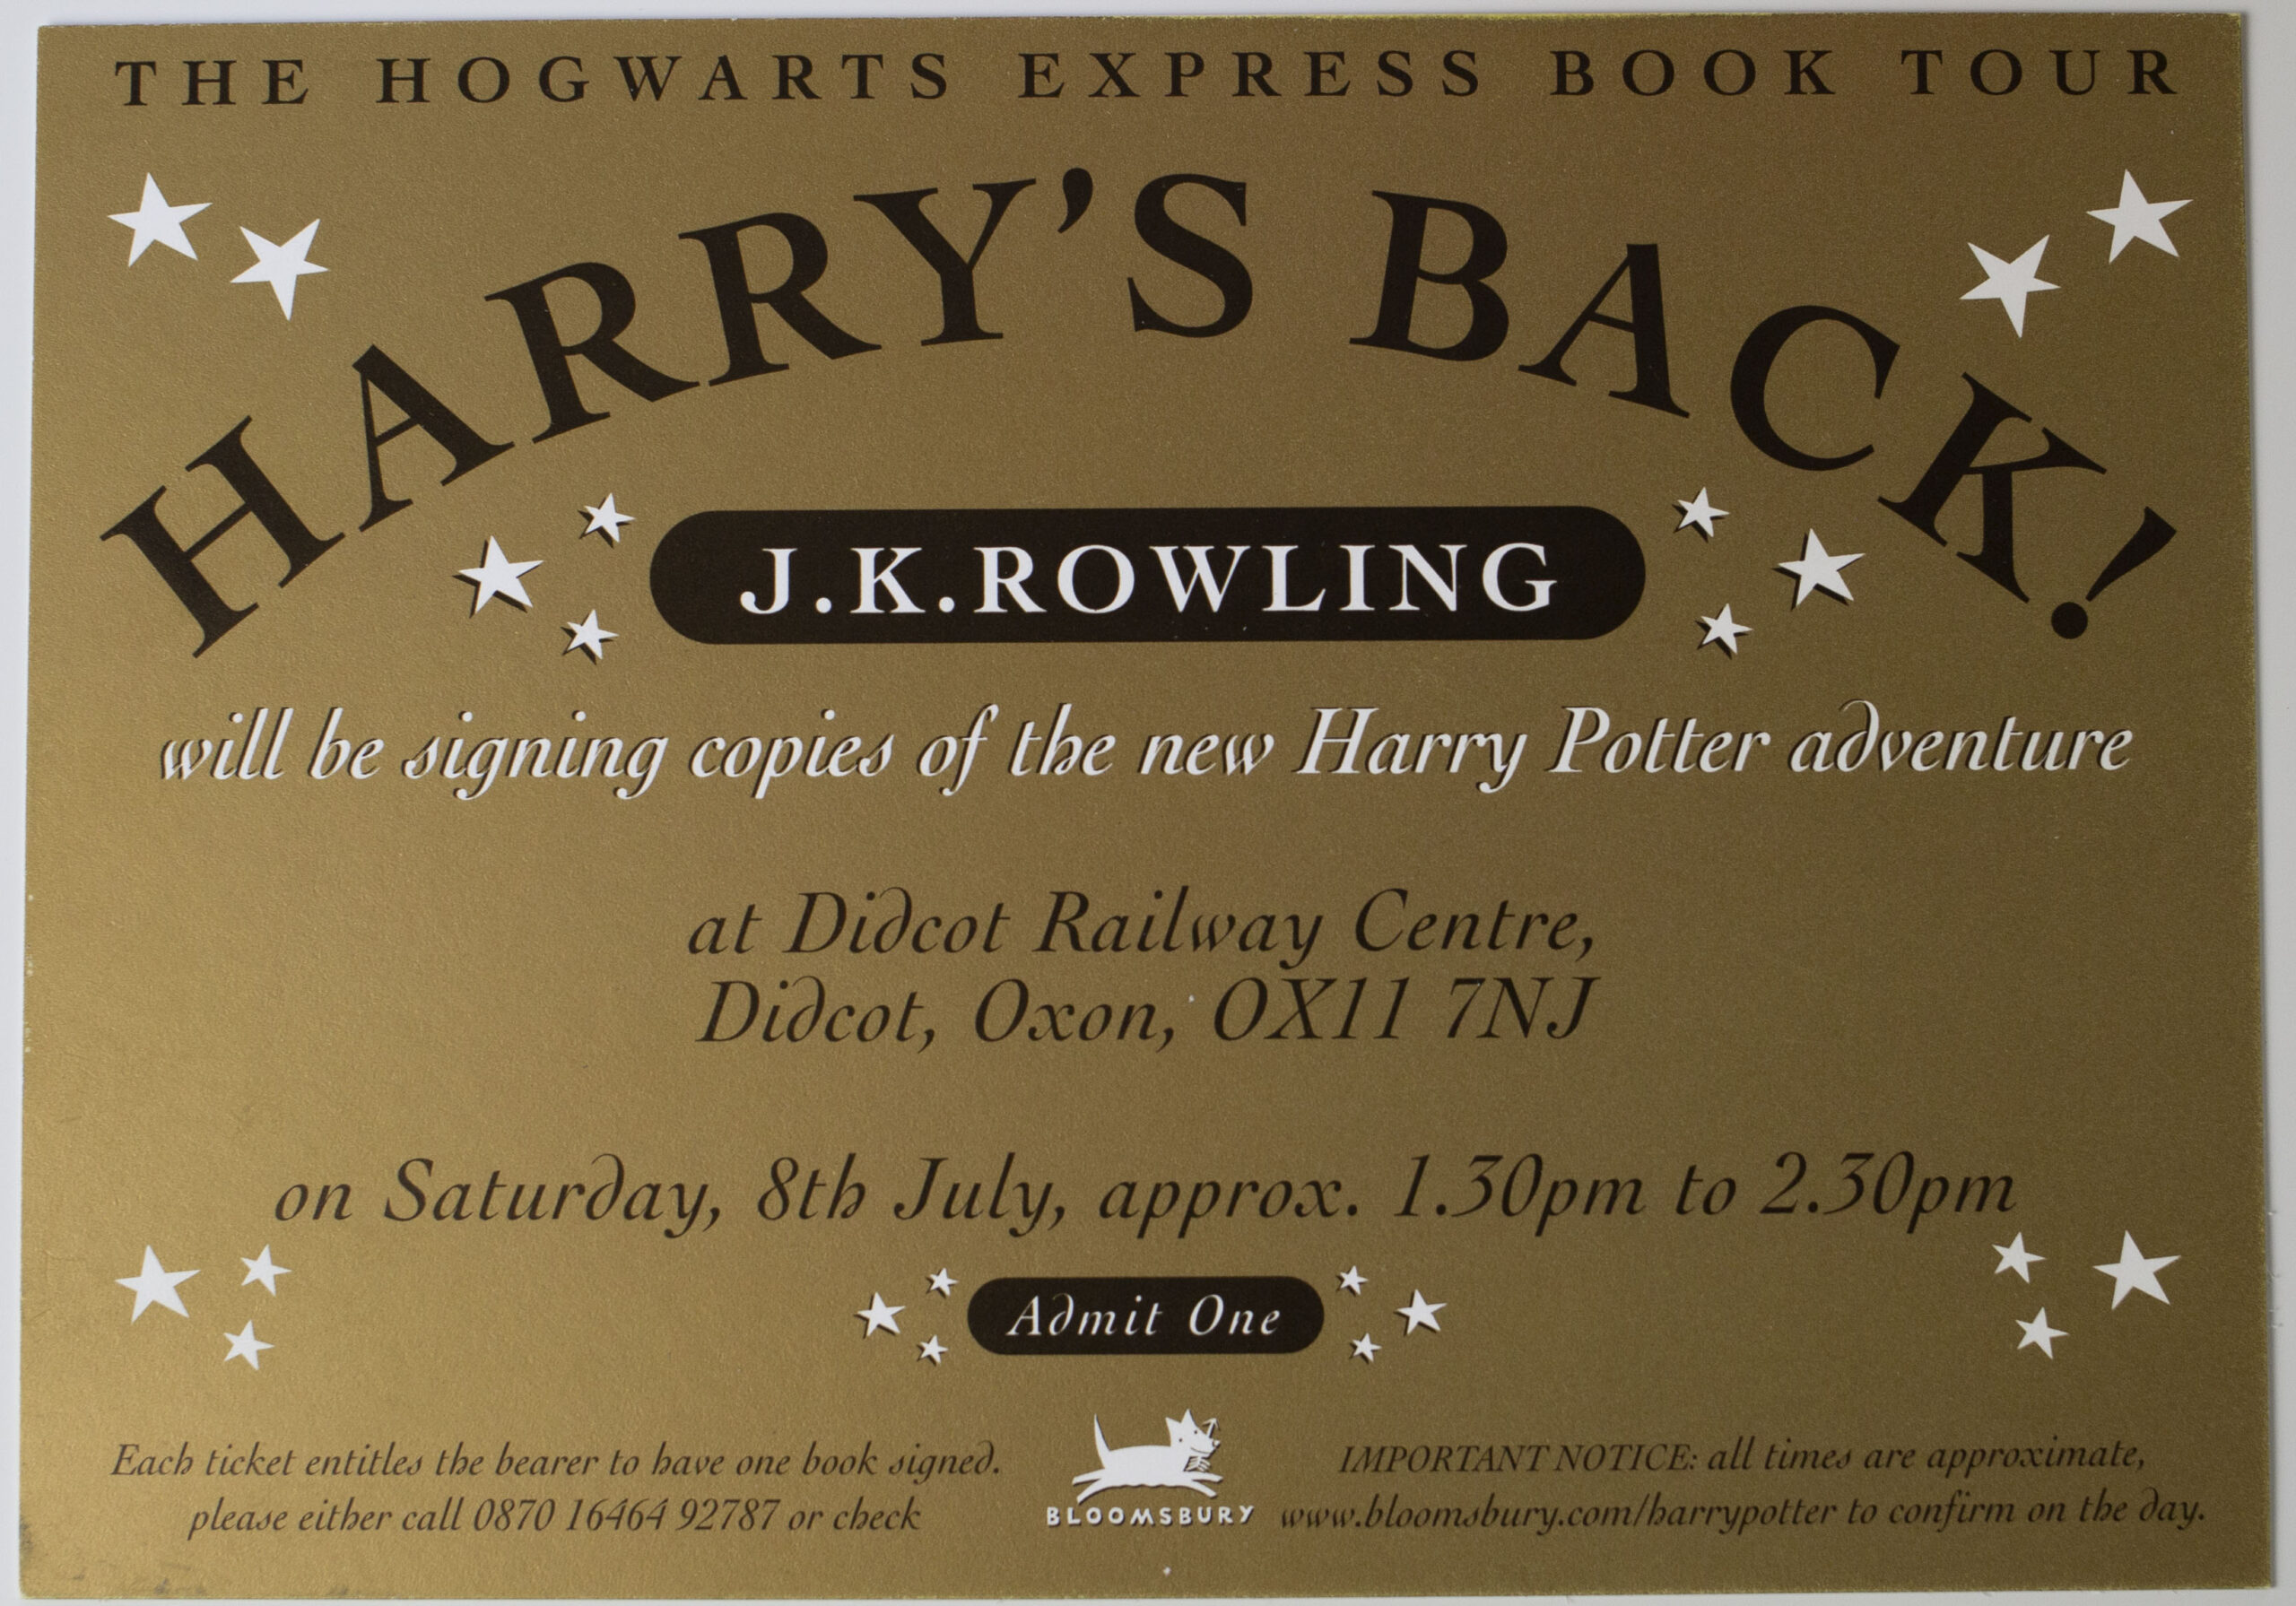 Rowling, J.K. -- Harry Potter and the Goblet of Fire [Book]